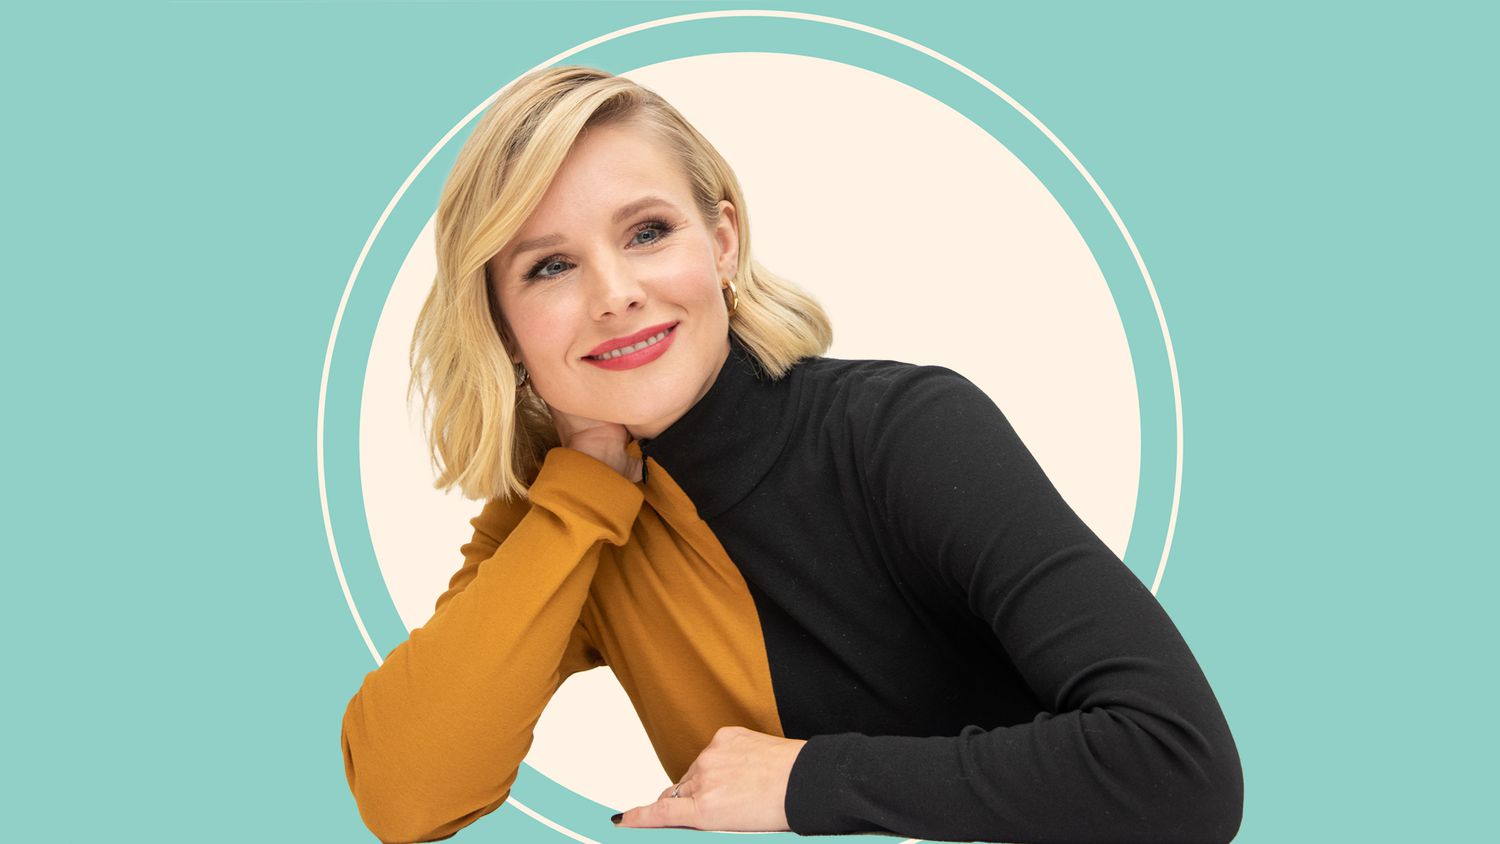 Kristen Bell’s Self-Care Philosophy All About the Little Things In Life